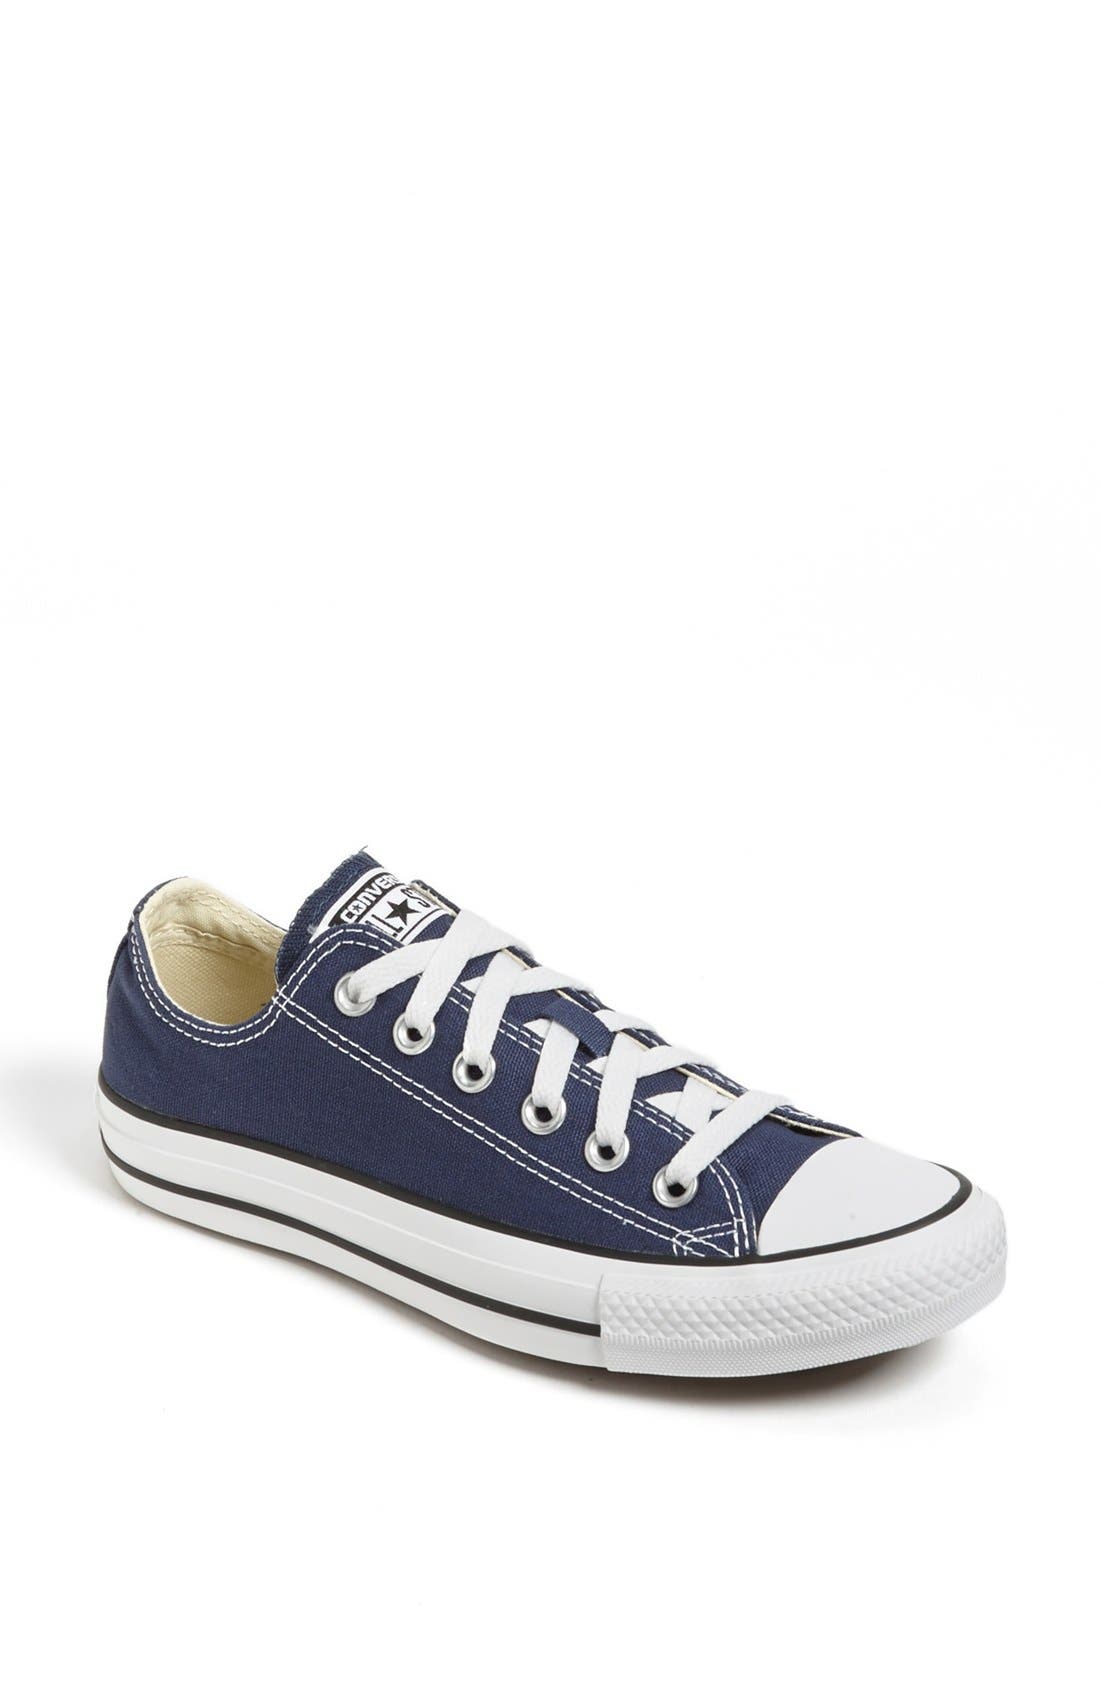 womens converse chuck taylor sneakers